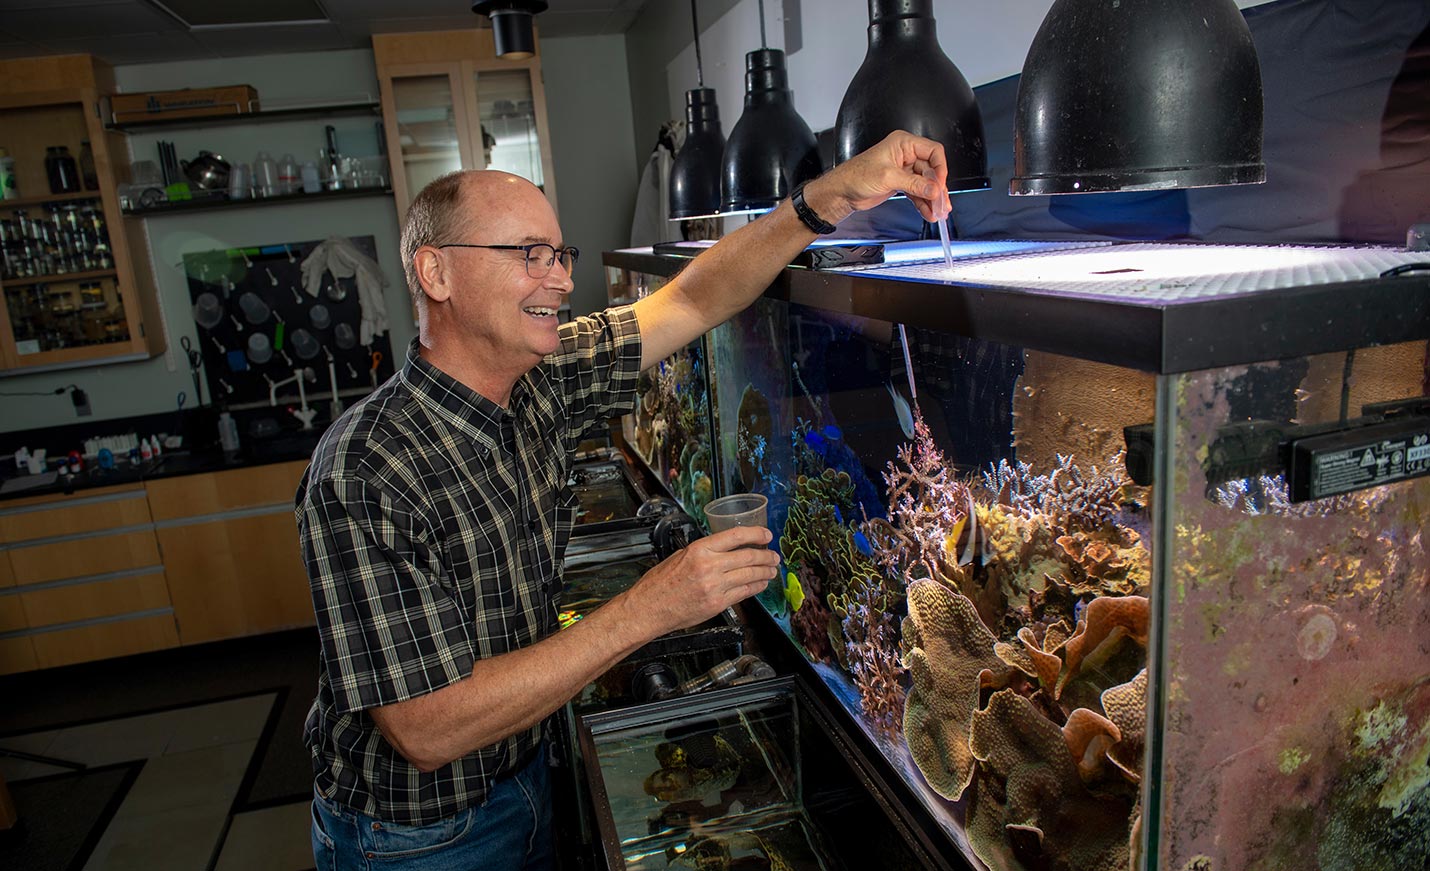 A professor takes a water sample from a fish tank in a marine science lab